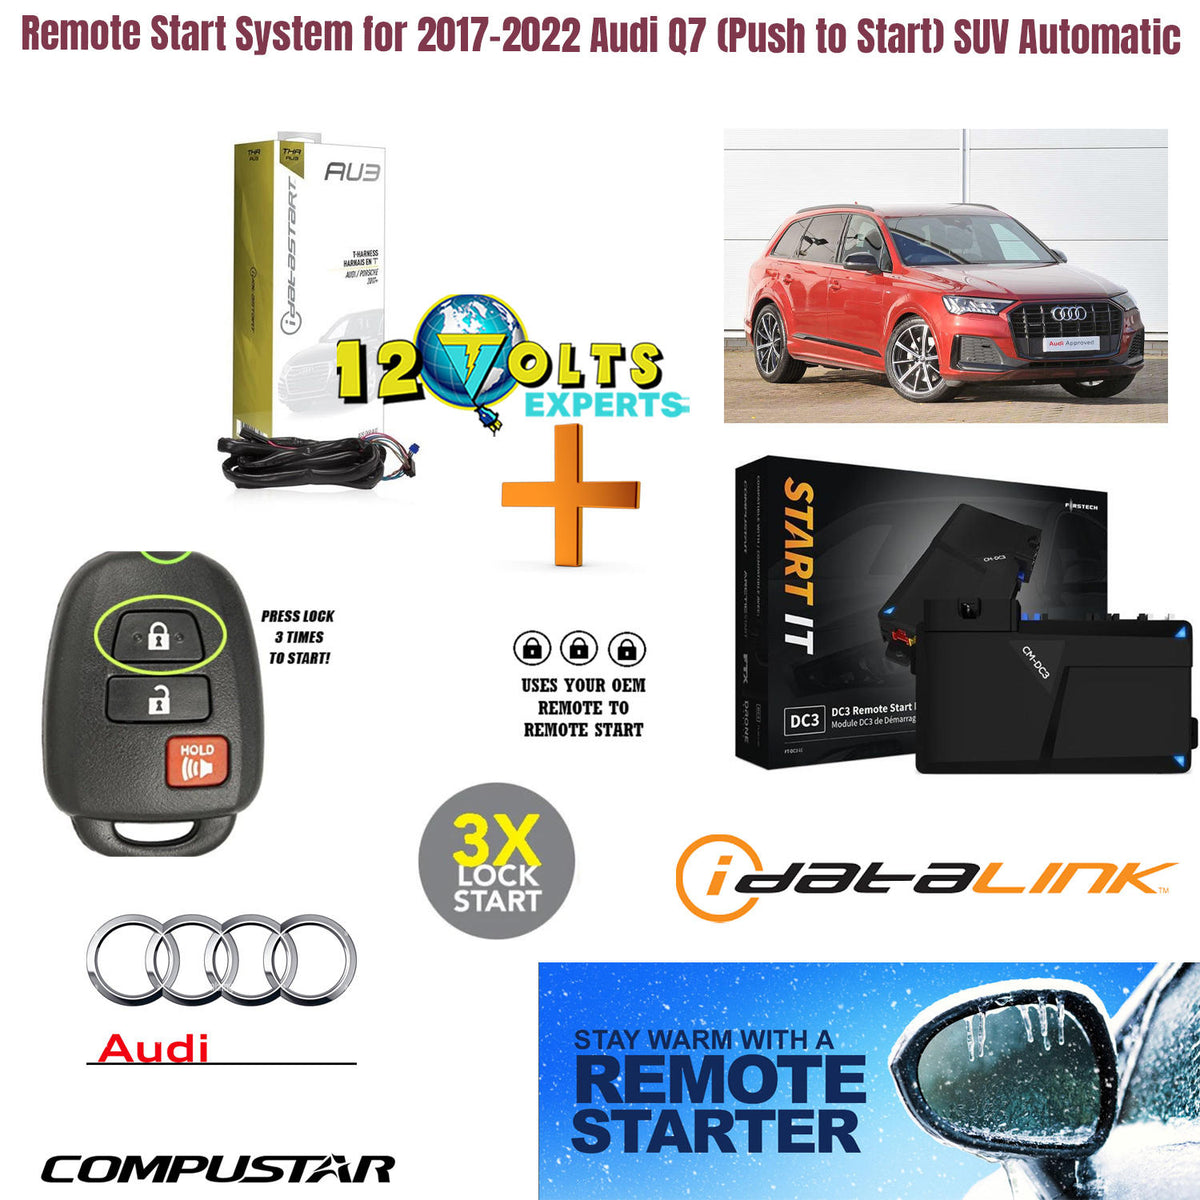 Remote Start System for 2017-2022 Audi Q7 (Push to Start) 6 Cyl Automatic